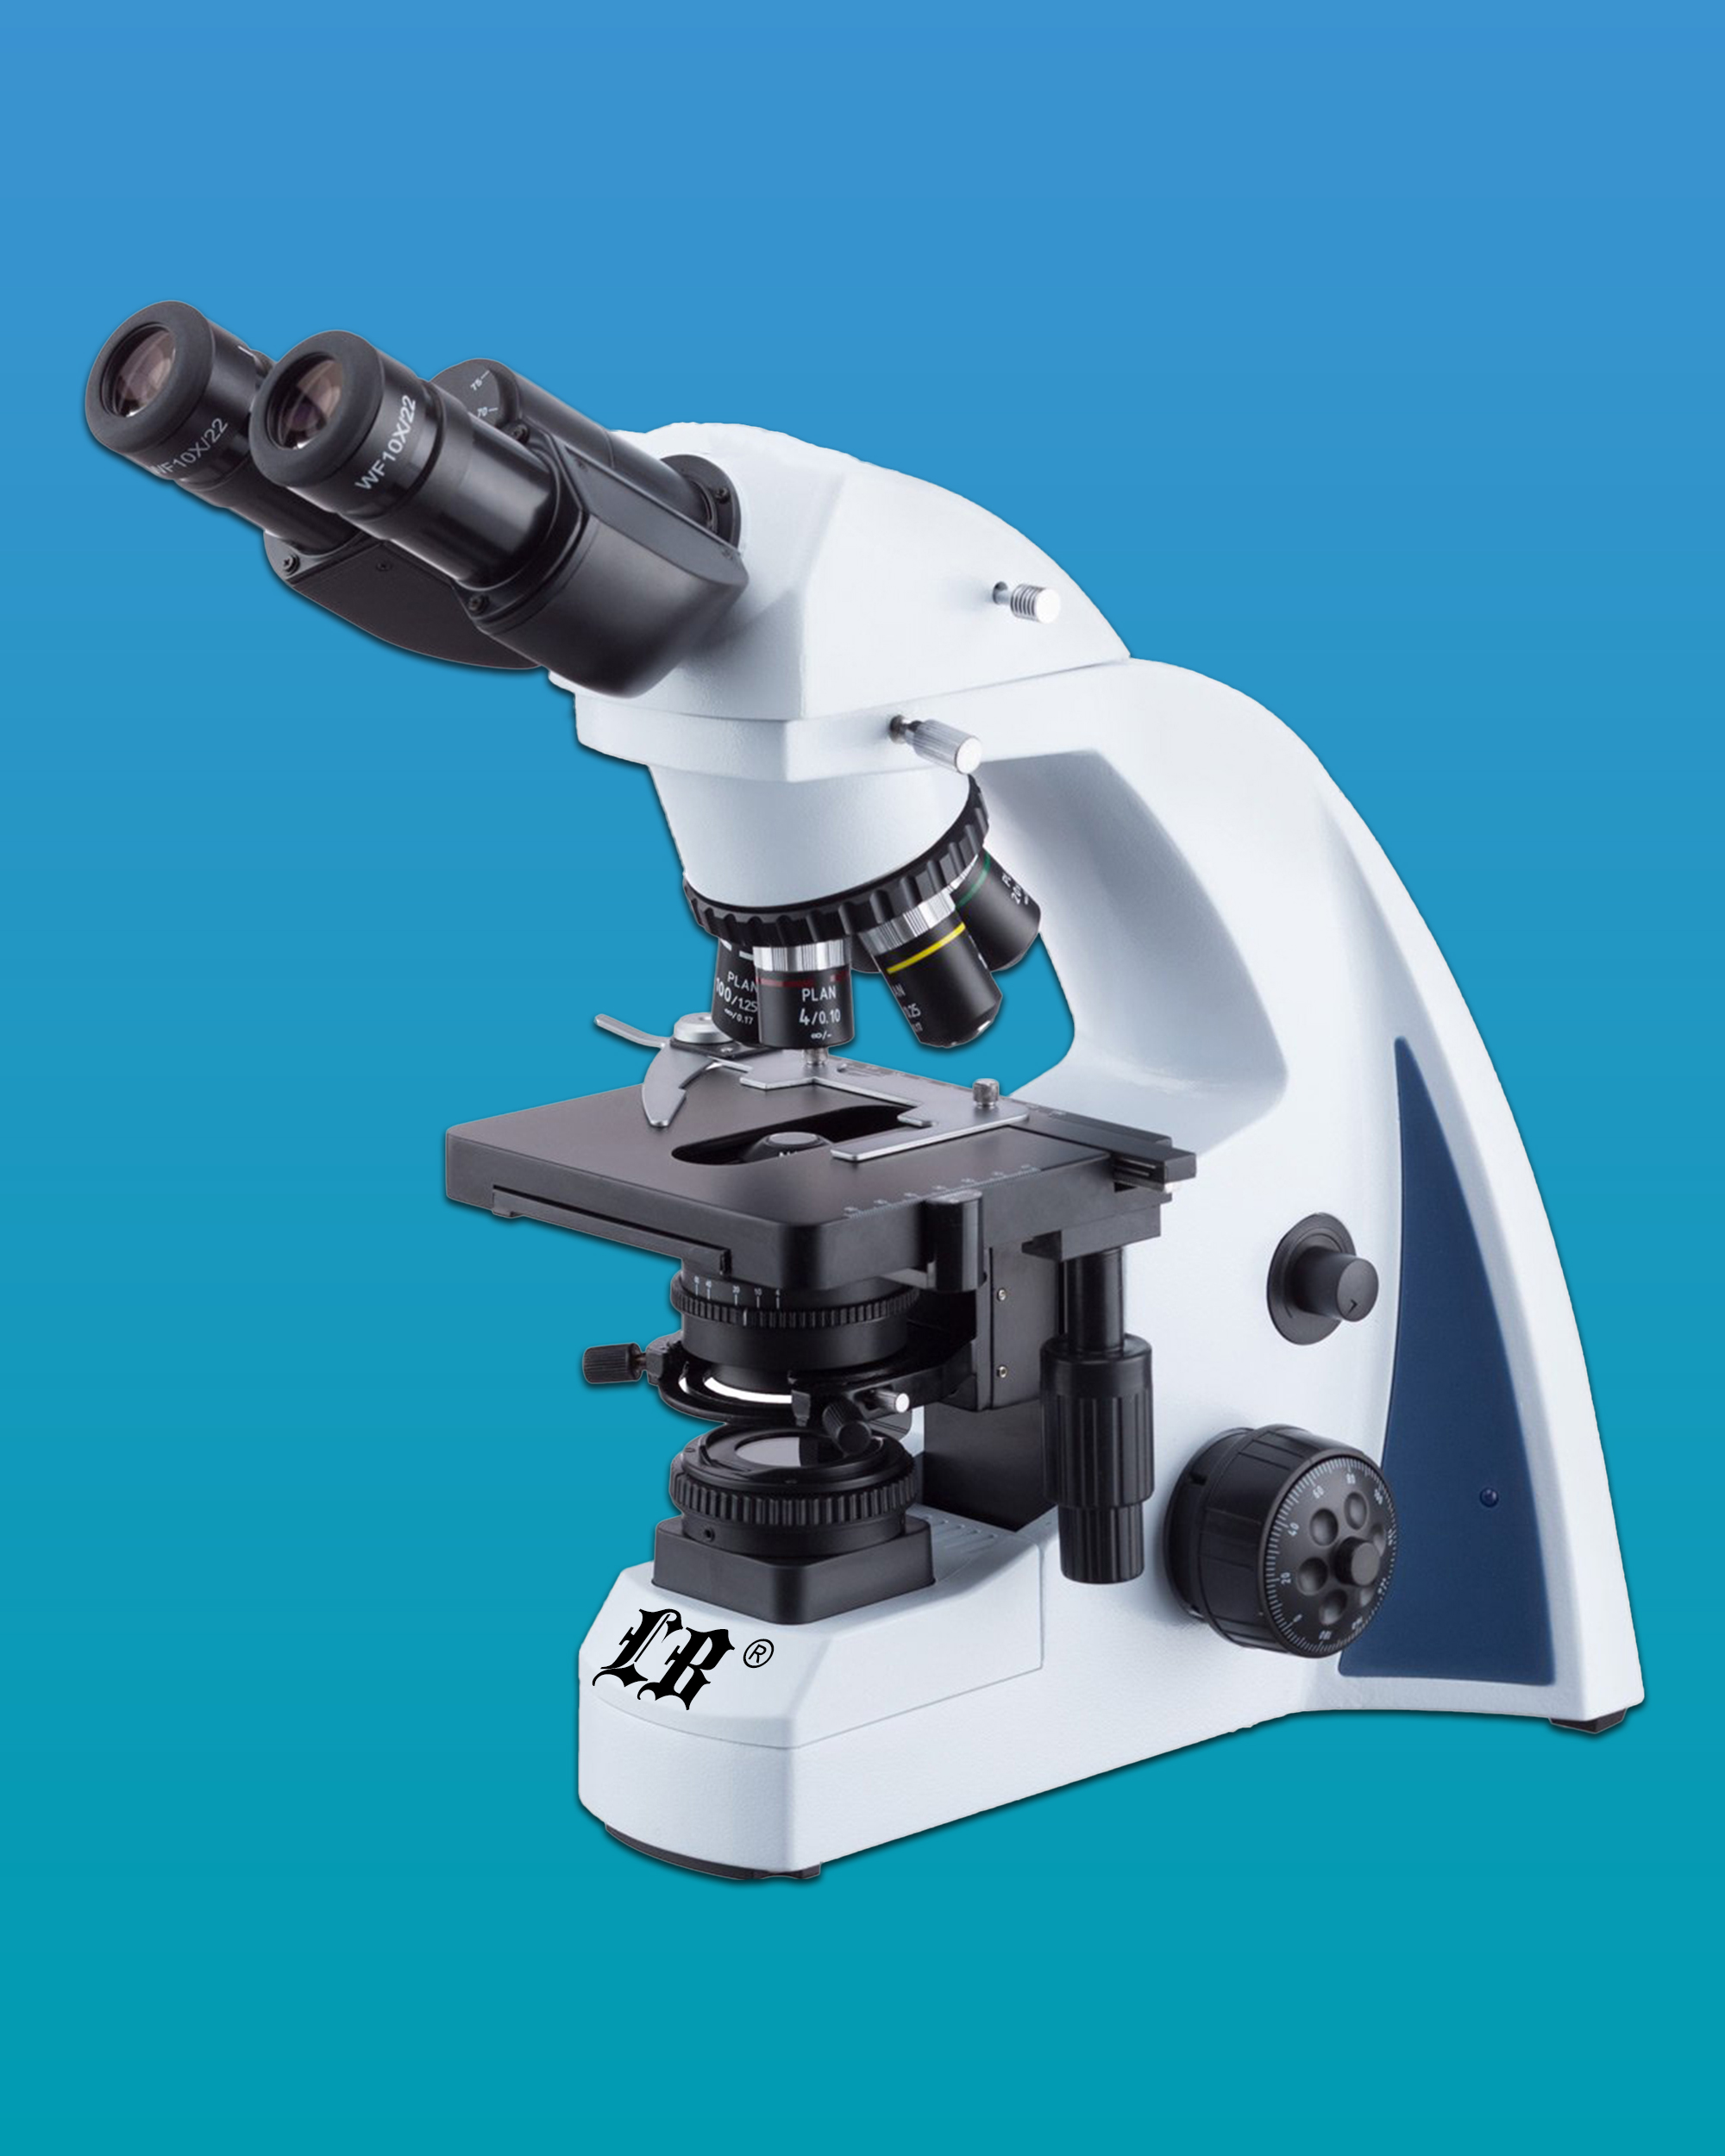 LB-243 Biological Binocular Microscope with Infinite Optical System and Infinite Plan Achromatic Objectives 4×, 10×, 40×(S), 100× (S,Oil)